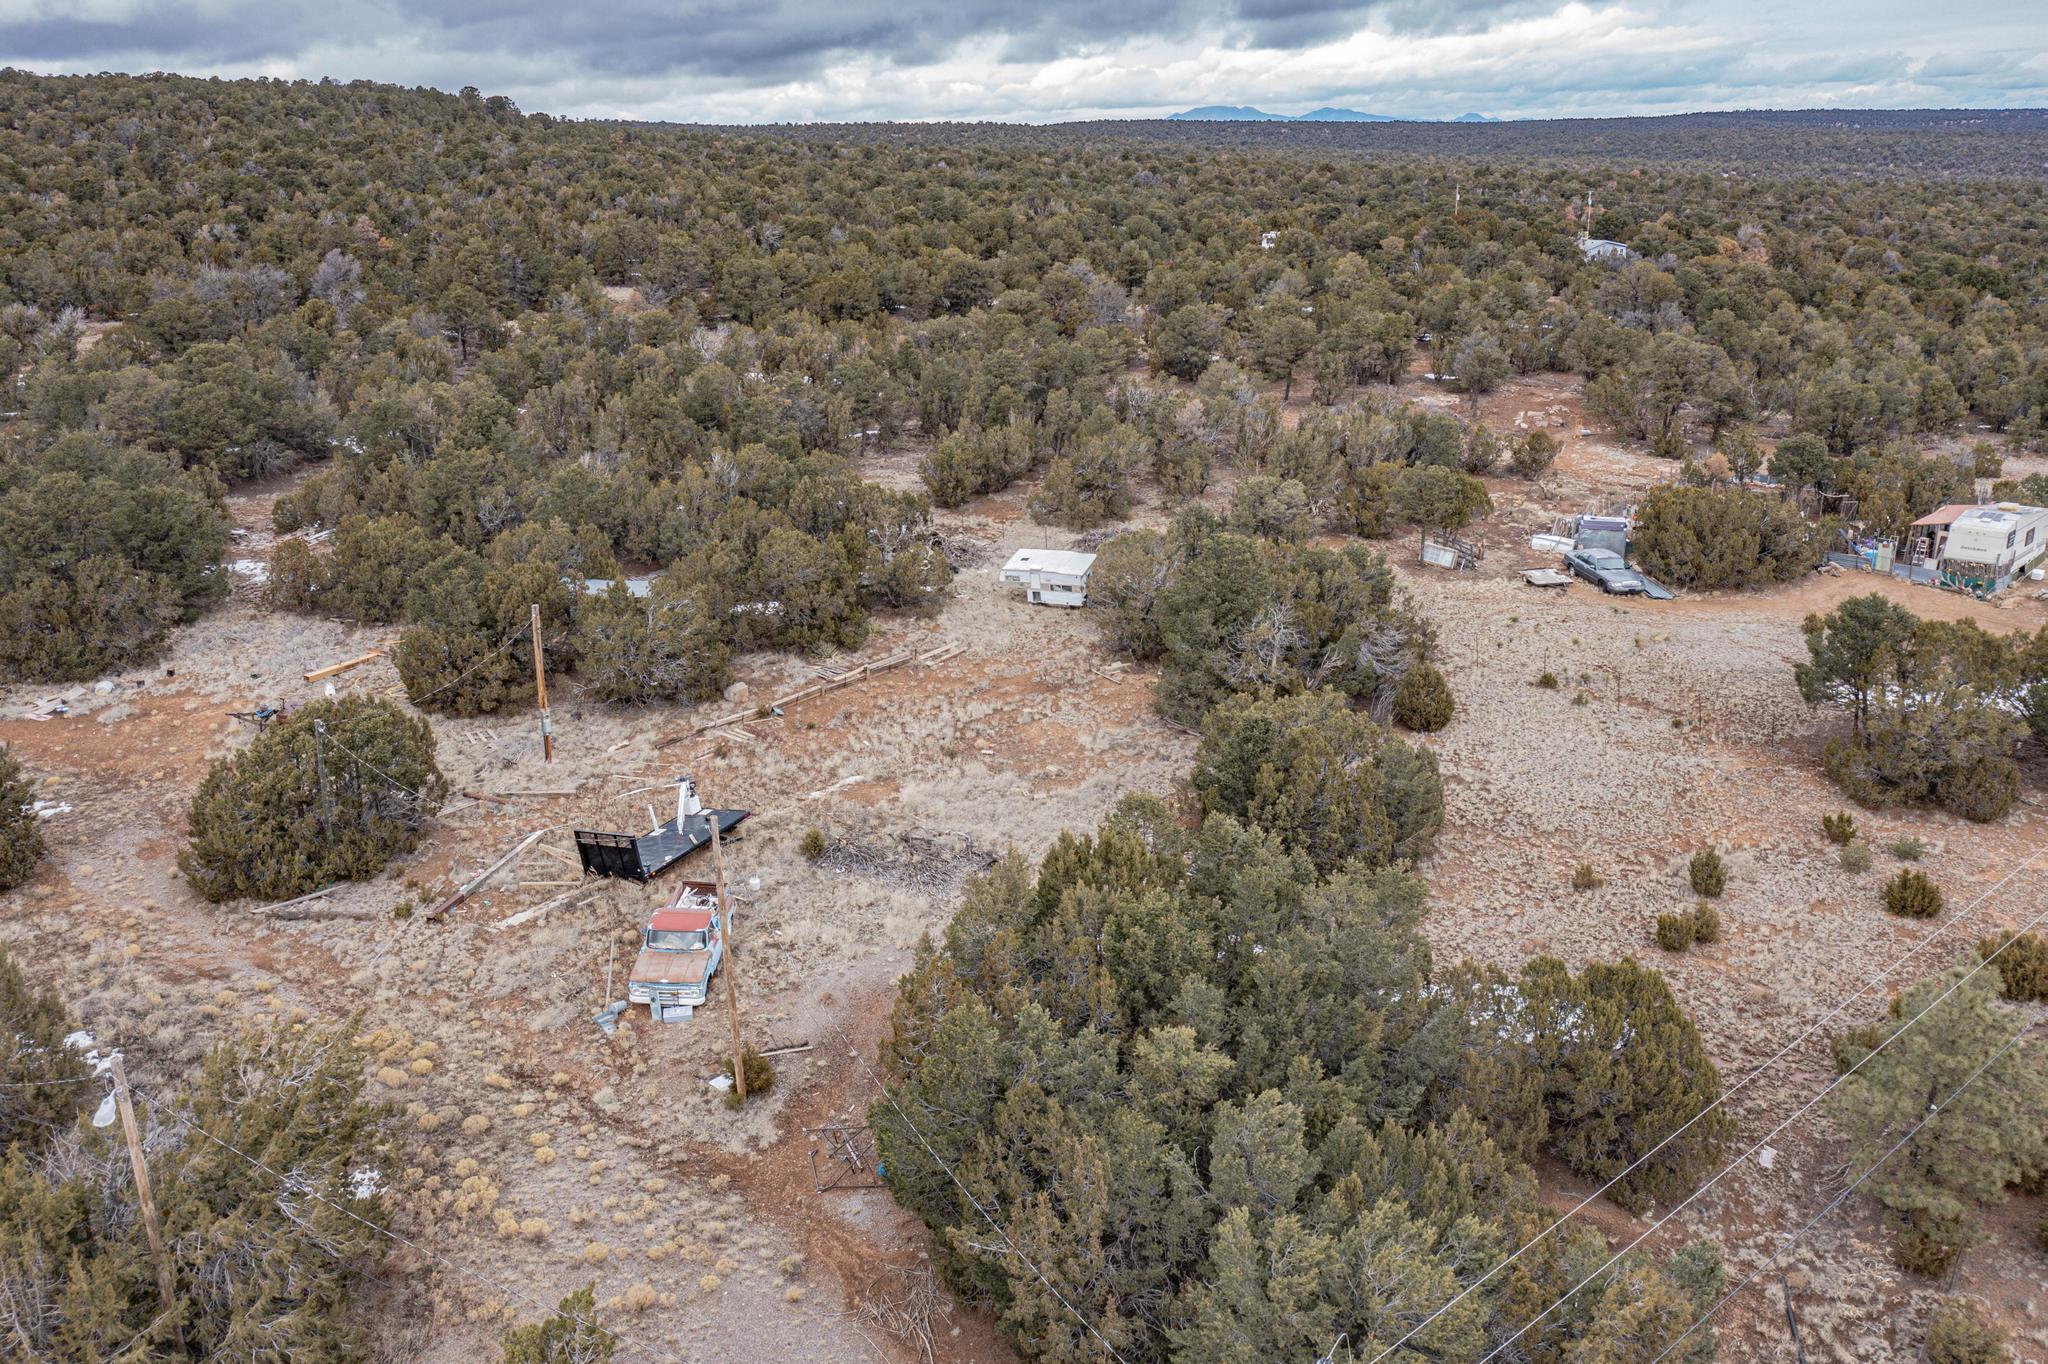 6 Doc Holiday Road, Edgewood, New Mexico 87015, ,Land,For Sale,6 Doc Holiday Road,1055615